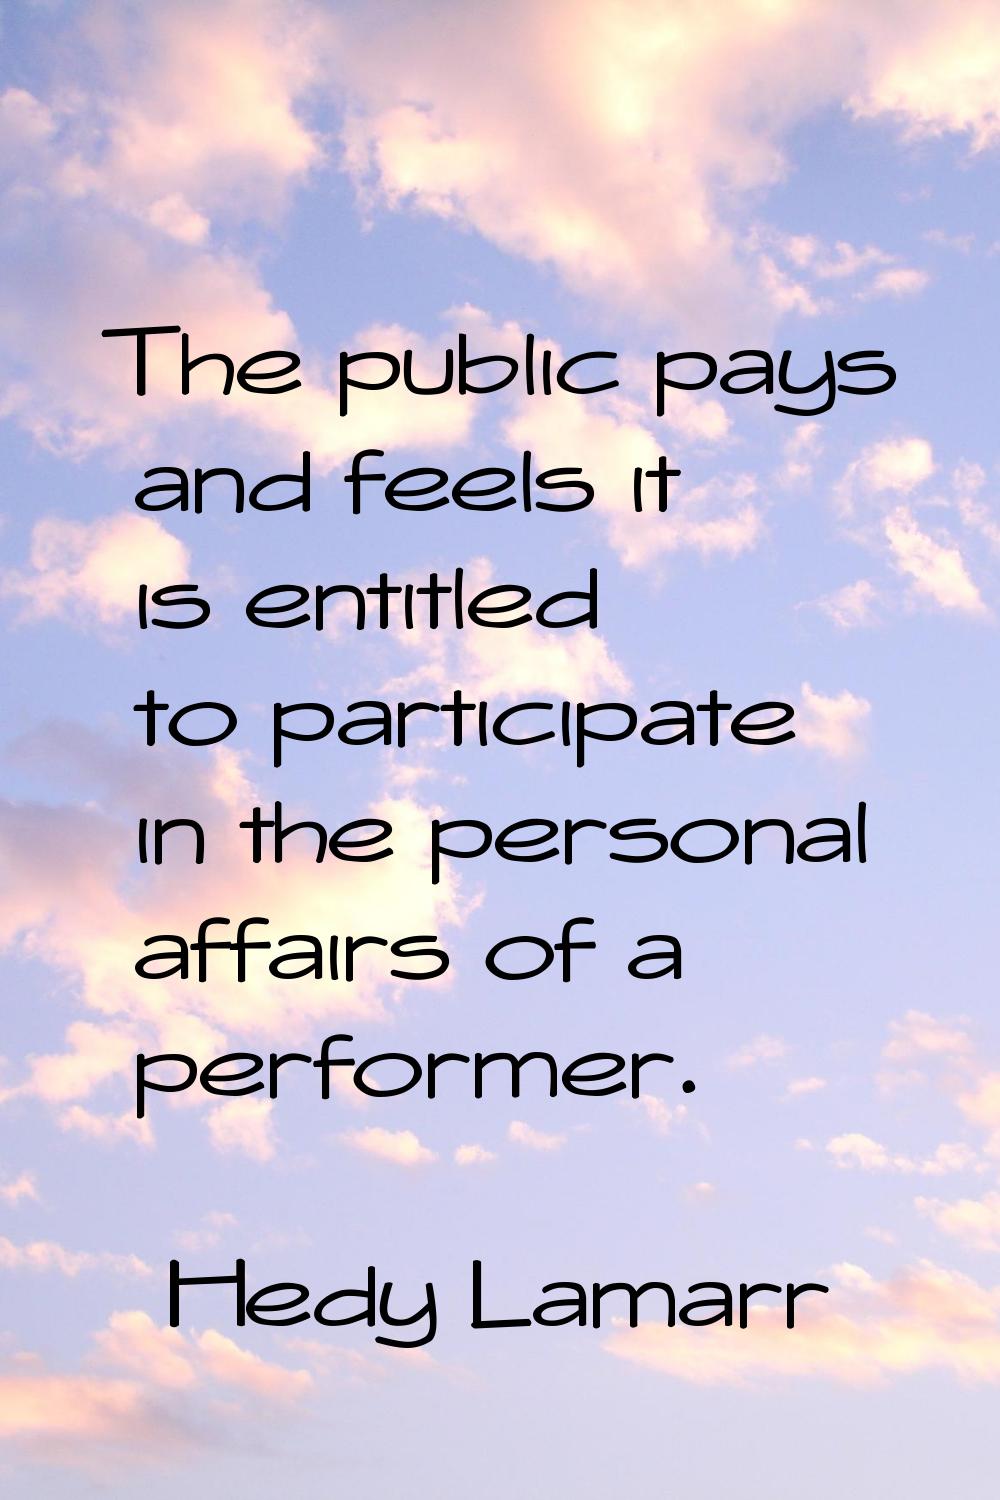 The public pays and feels it is entitled to participate in the personal affairs of a performer.